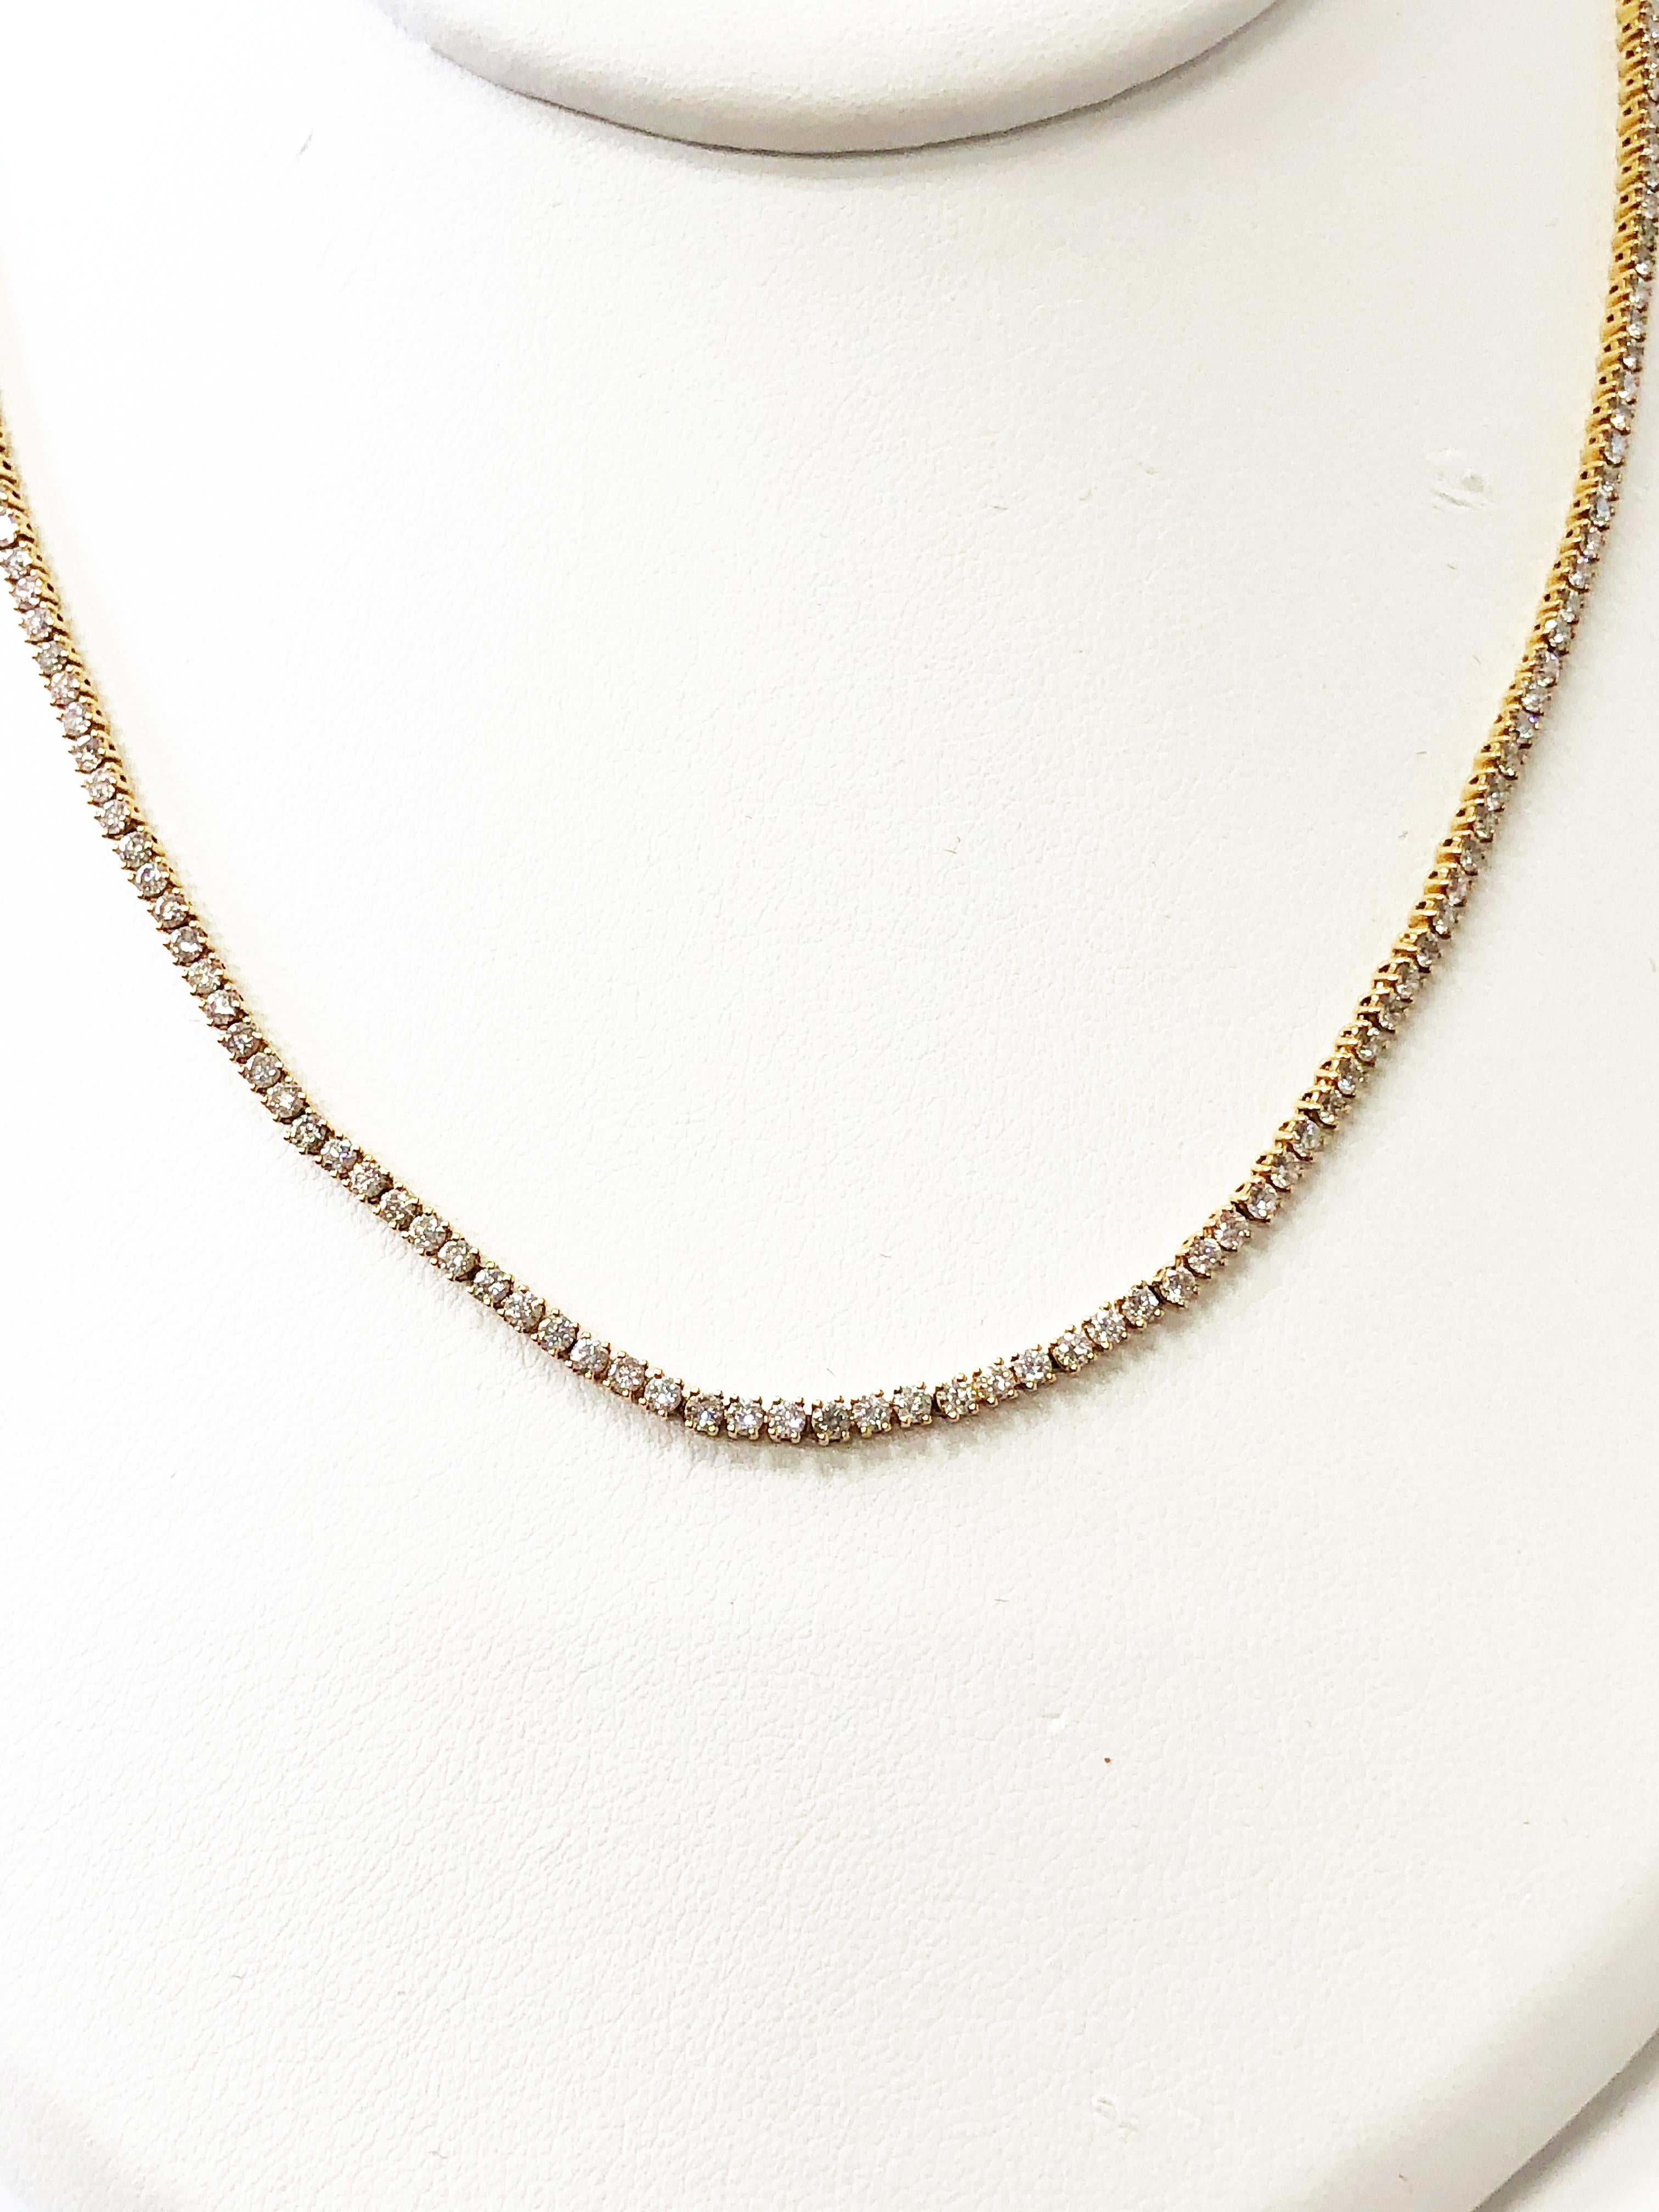 This Anita Ko white diamond round necklace in 18k yellow gold is a classic piece that is a great addition to any jewelry collection.  With 5.46 carats of good quality, white, and bright diamonds, this necklace can be layered or worn on it's own. 